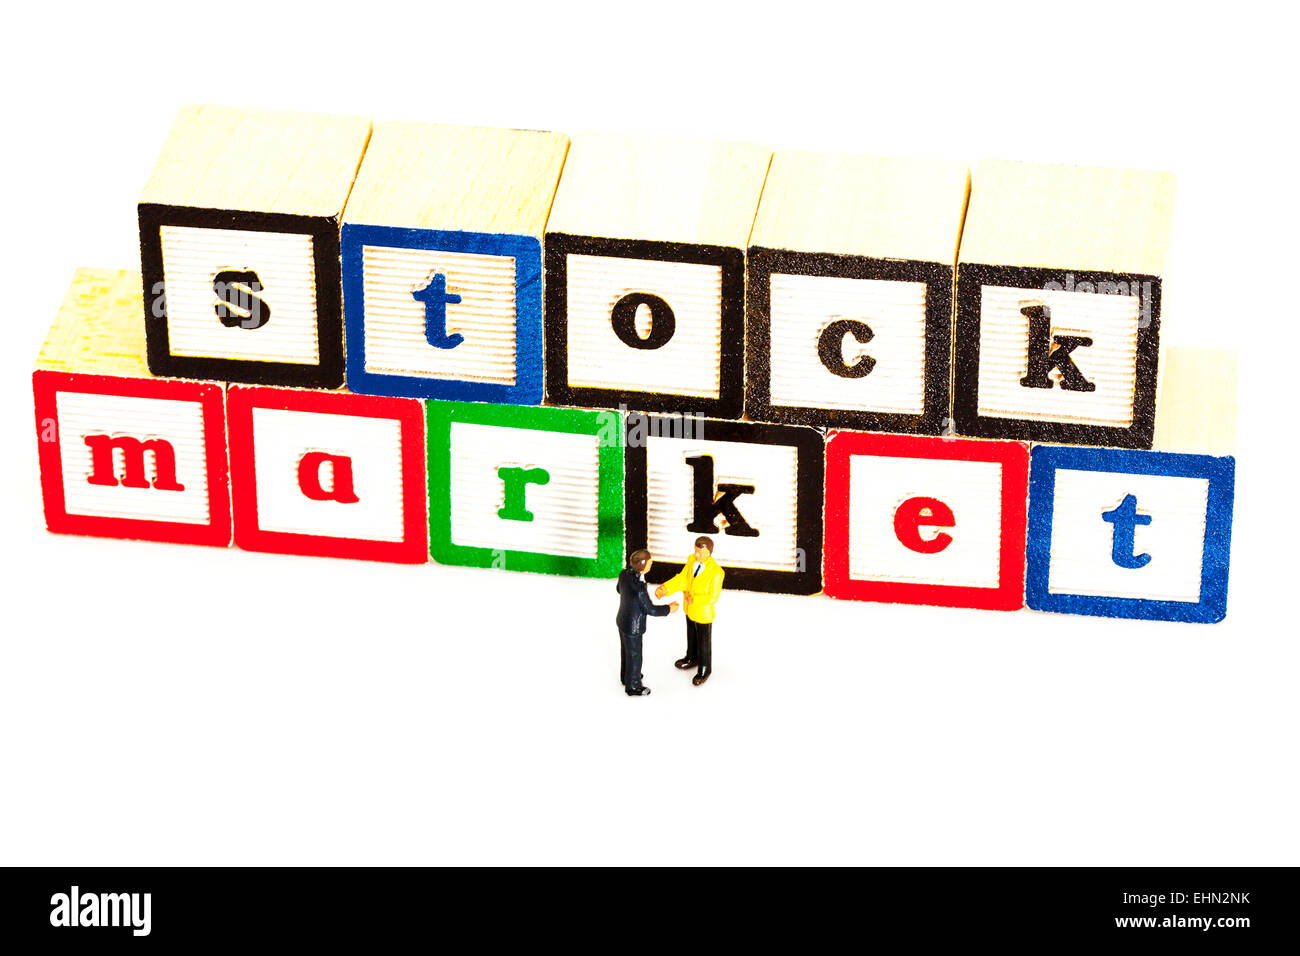 stock market exchange deal shares stocks ftse index deals business businessmen isolated cut out cutout white background finance Stock Photo